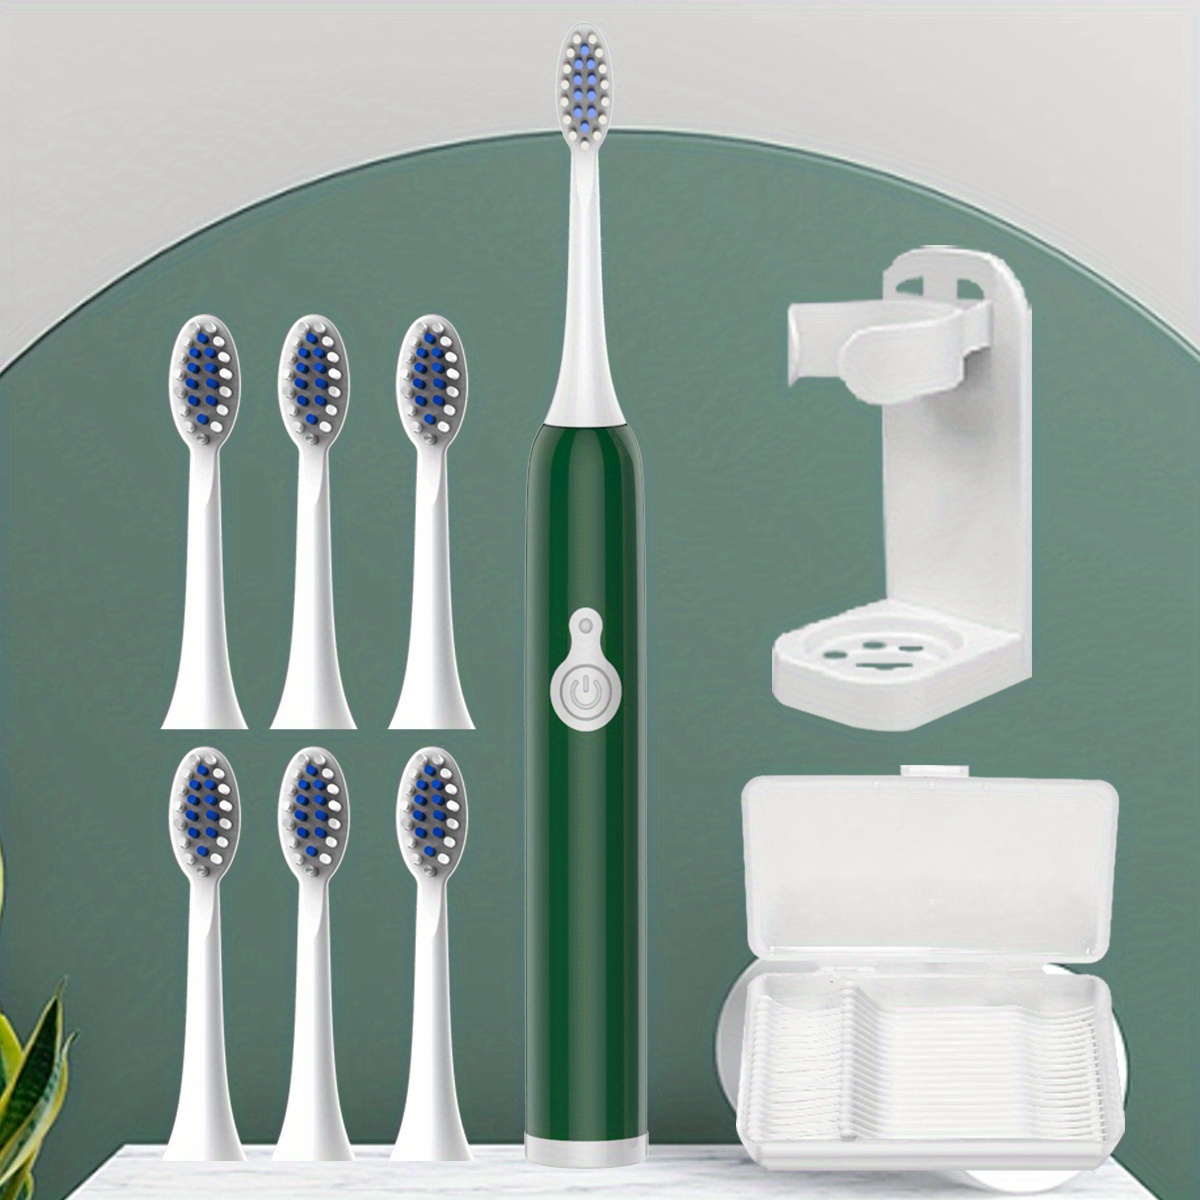 Electric Toothbrushes, Floss, & Dental Health